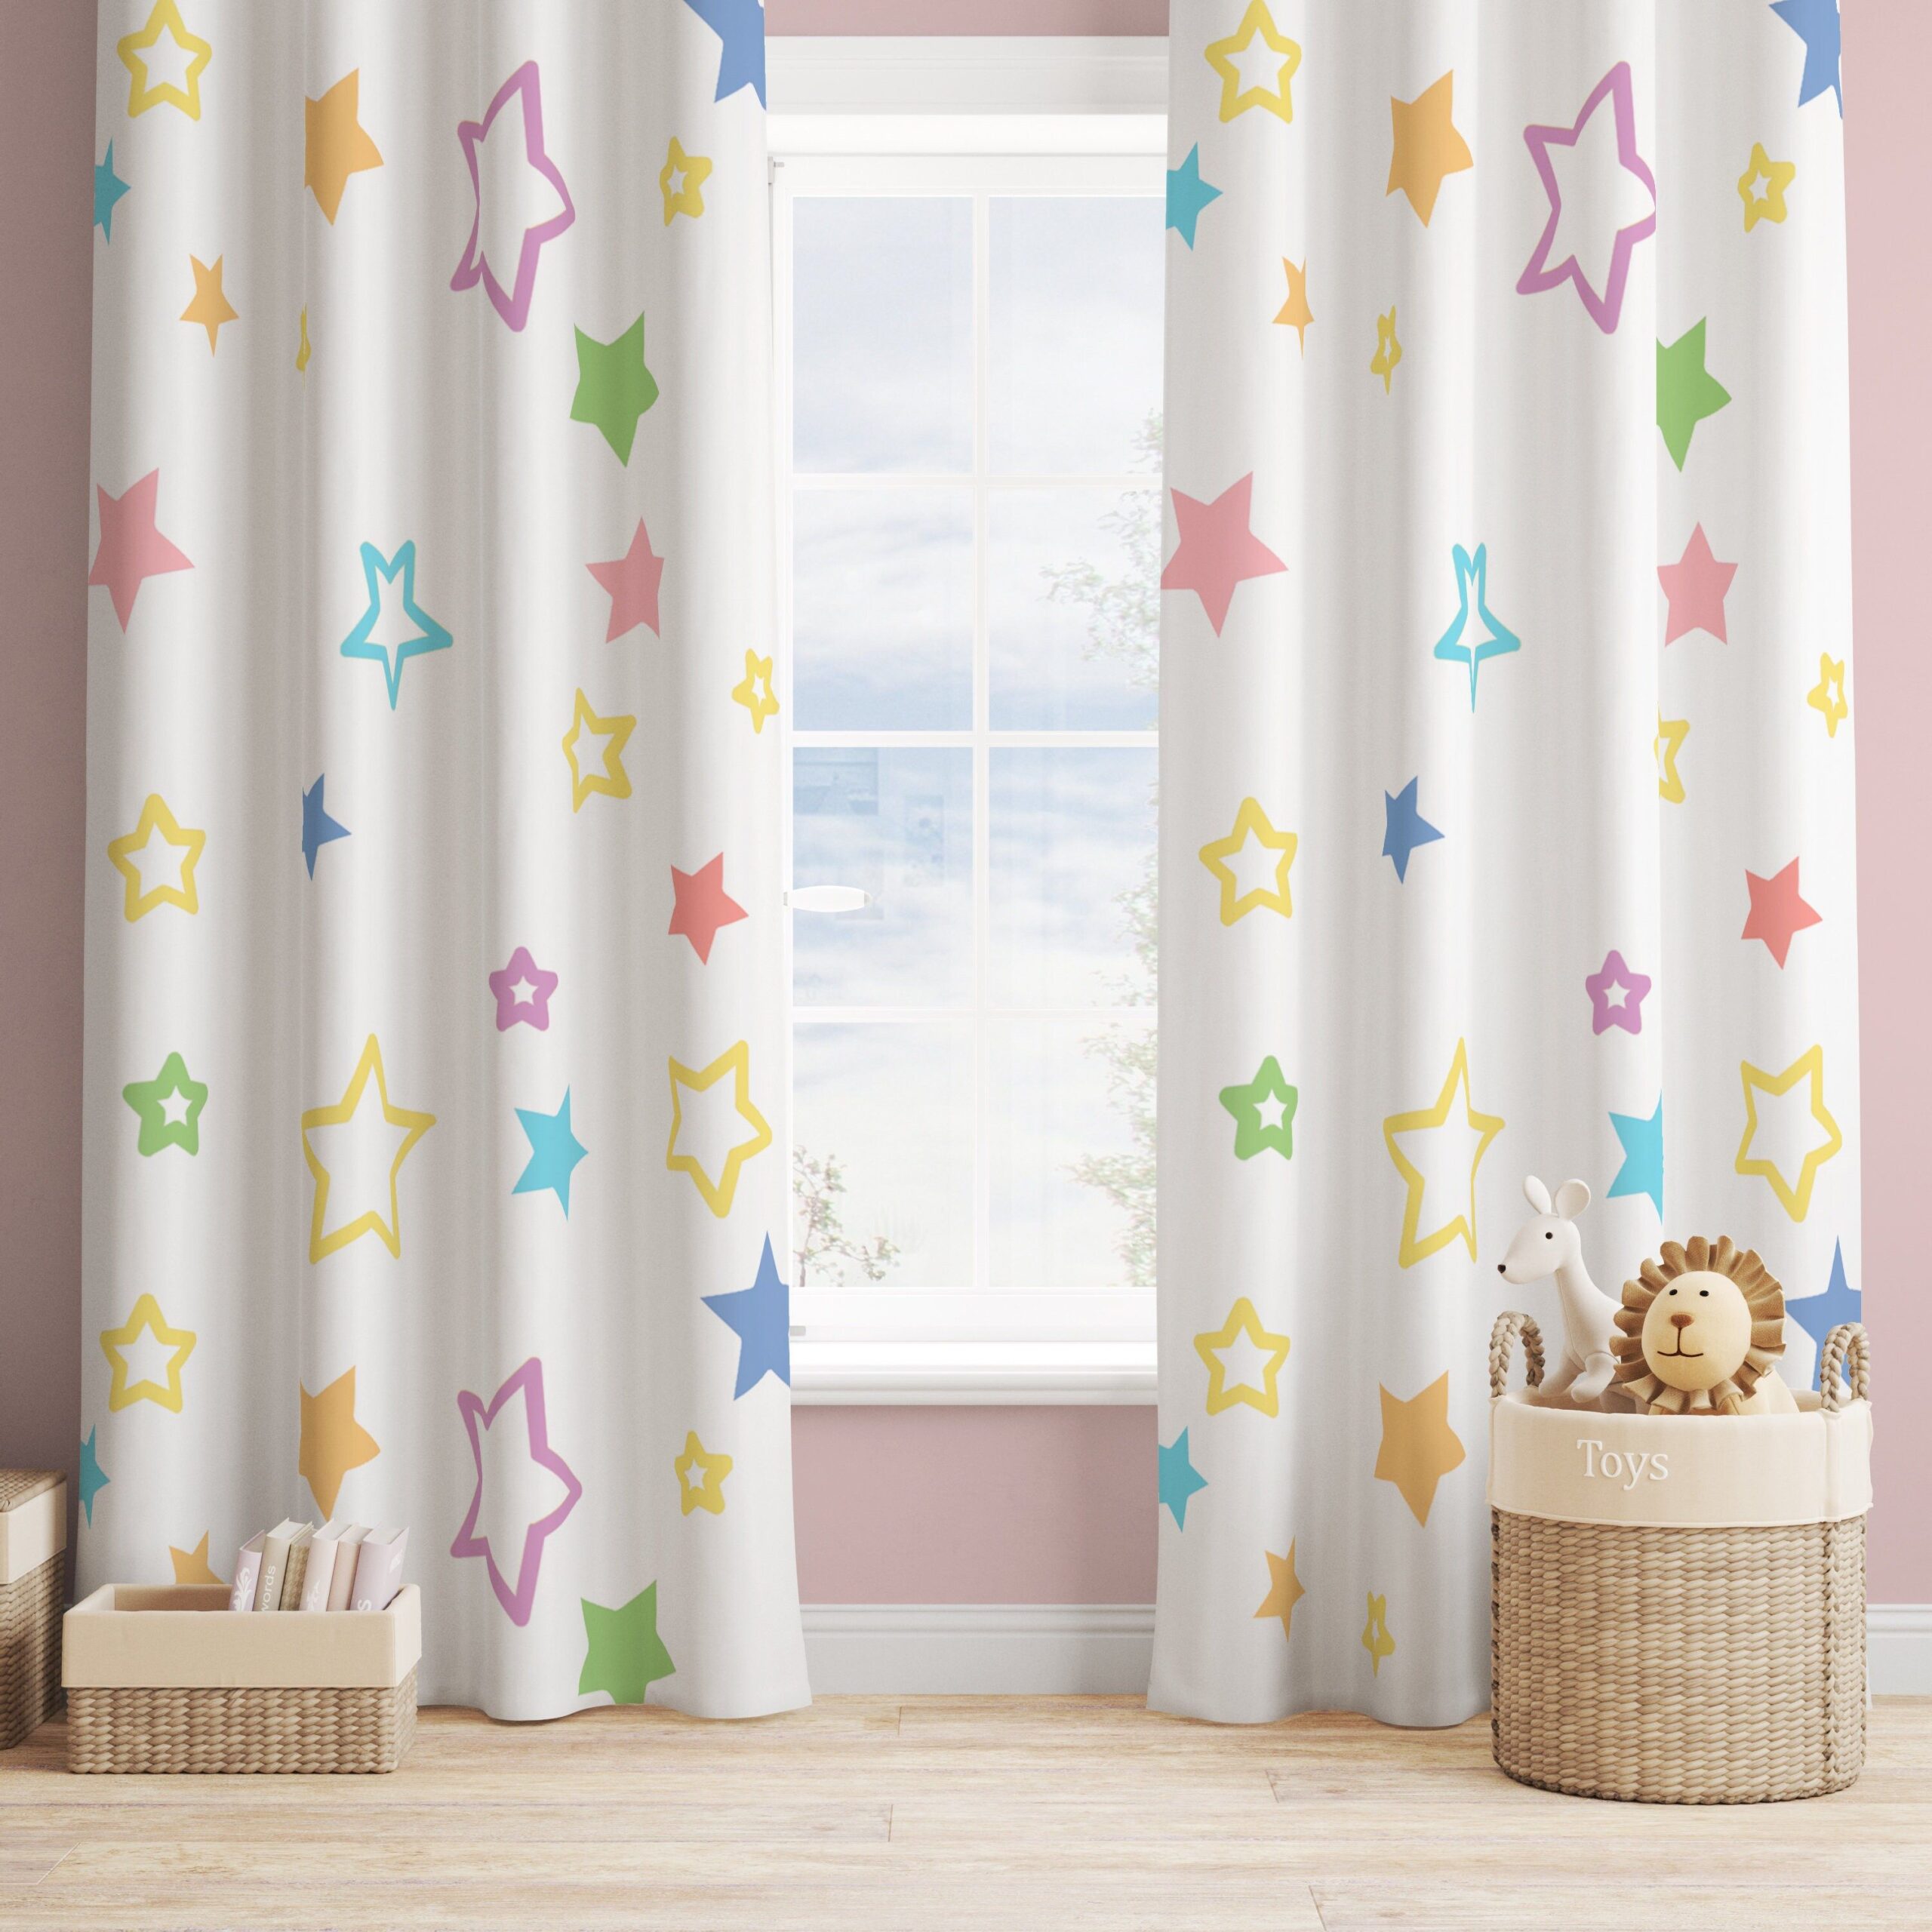 Keeping Kids Safe and Secure with Blackout Curtains